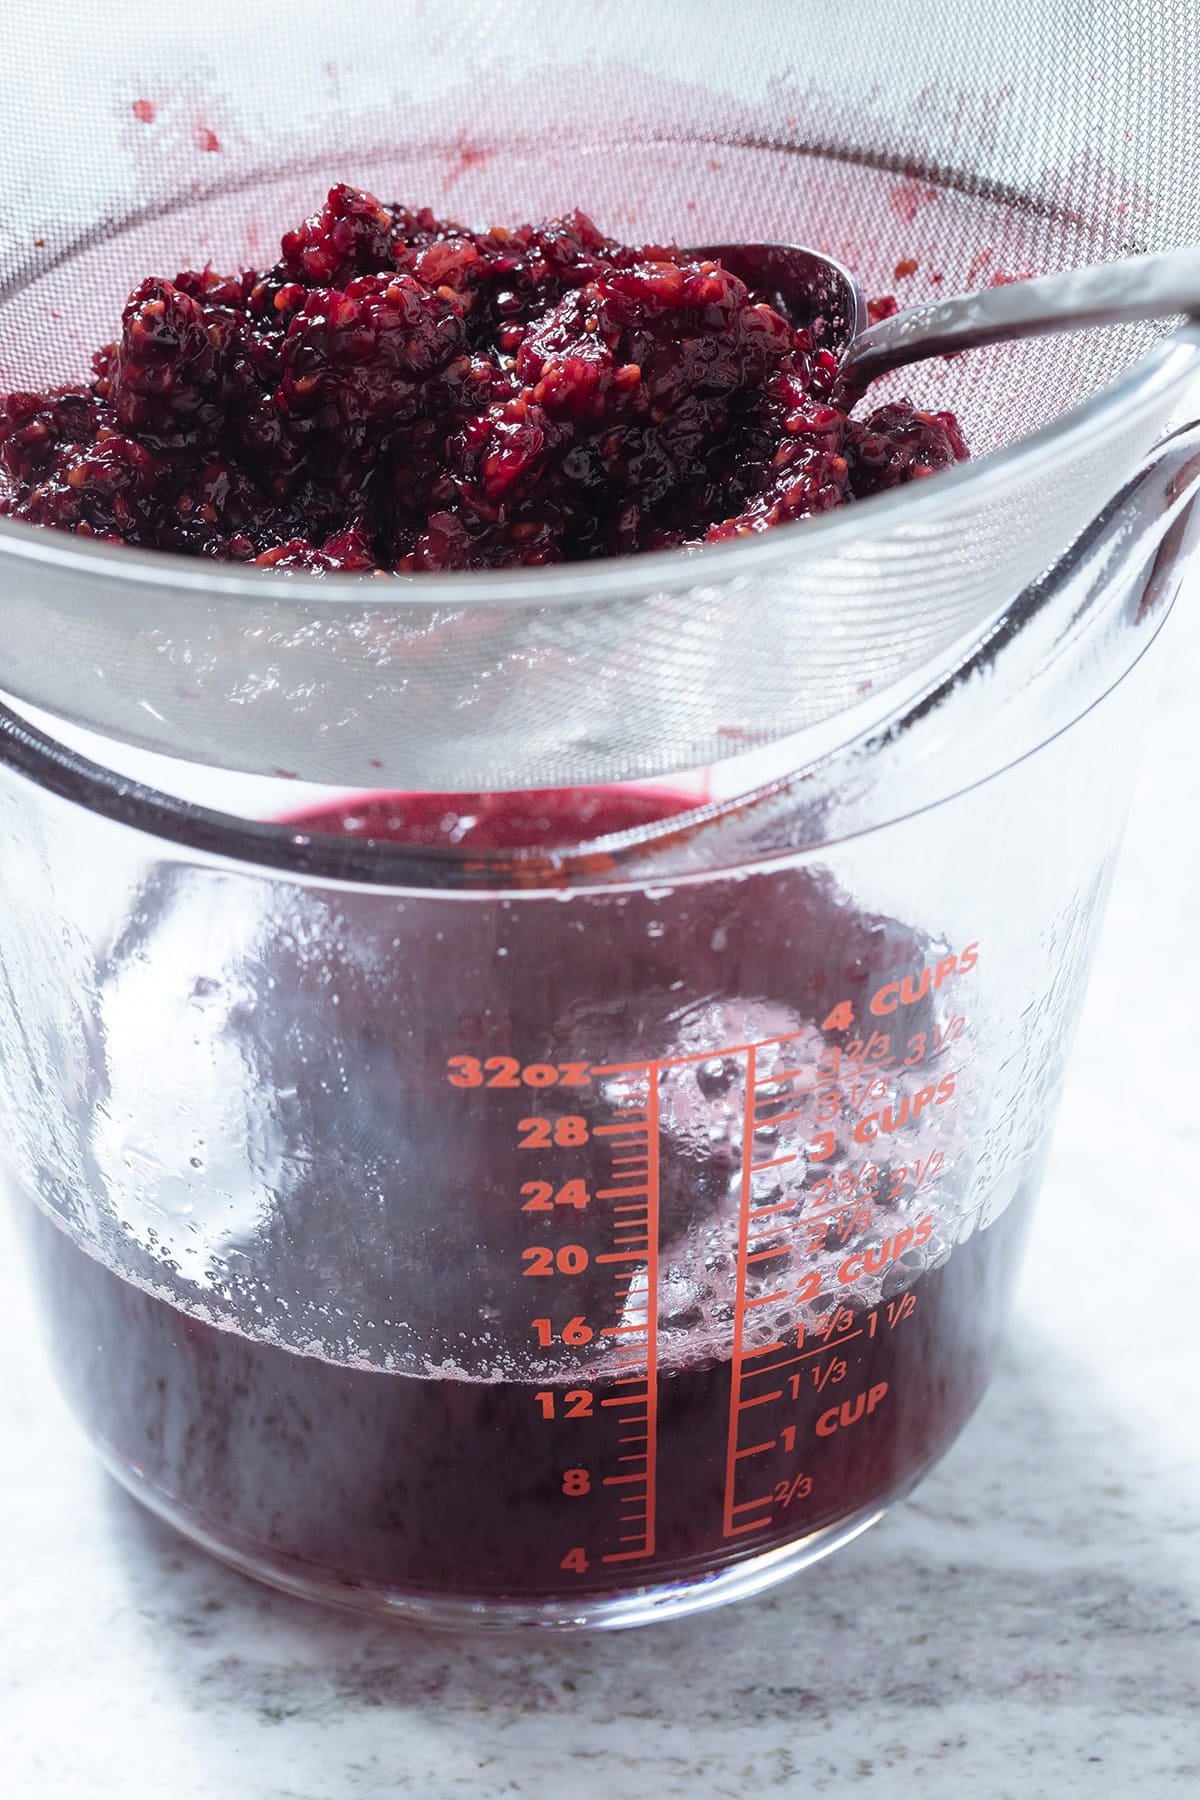 Blackberry syrup straining through a fine mesh strainer into a tall glass measuring cup.